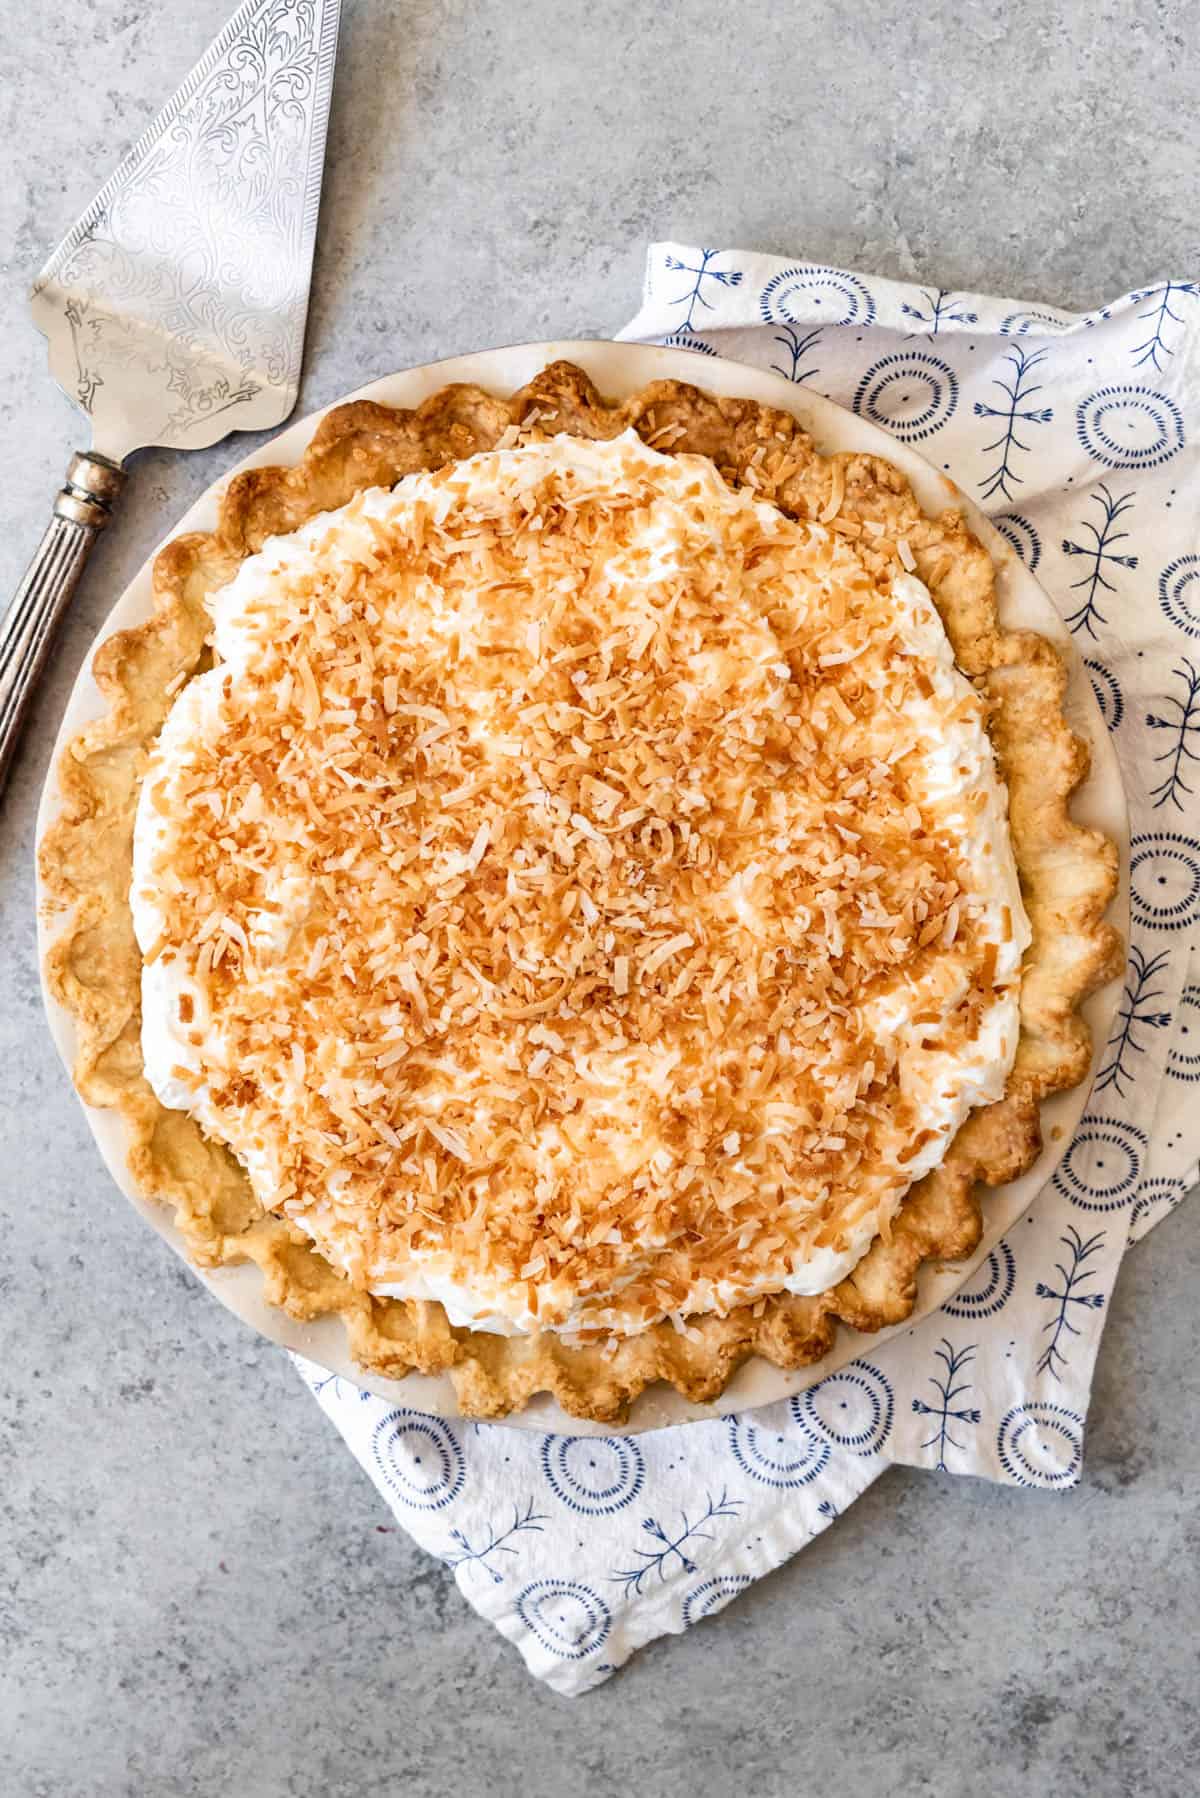 An image of a homemade coconut cream pie made from scratch, covered in toasted coconut.